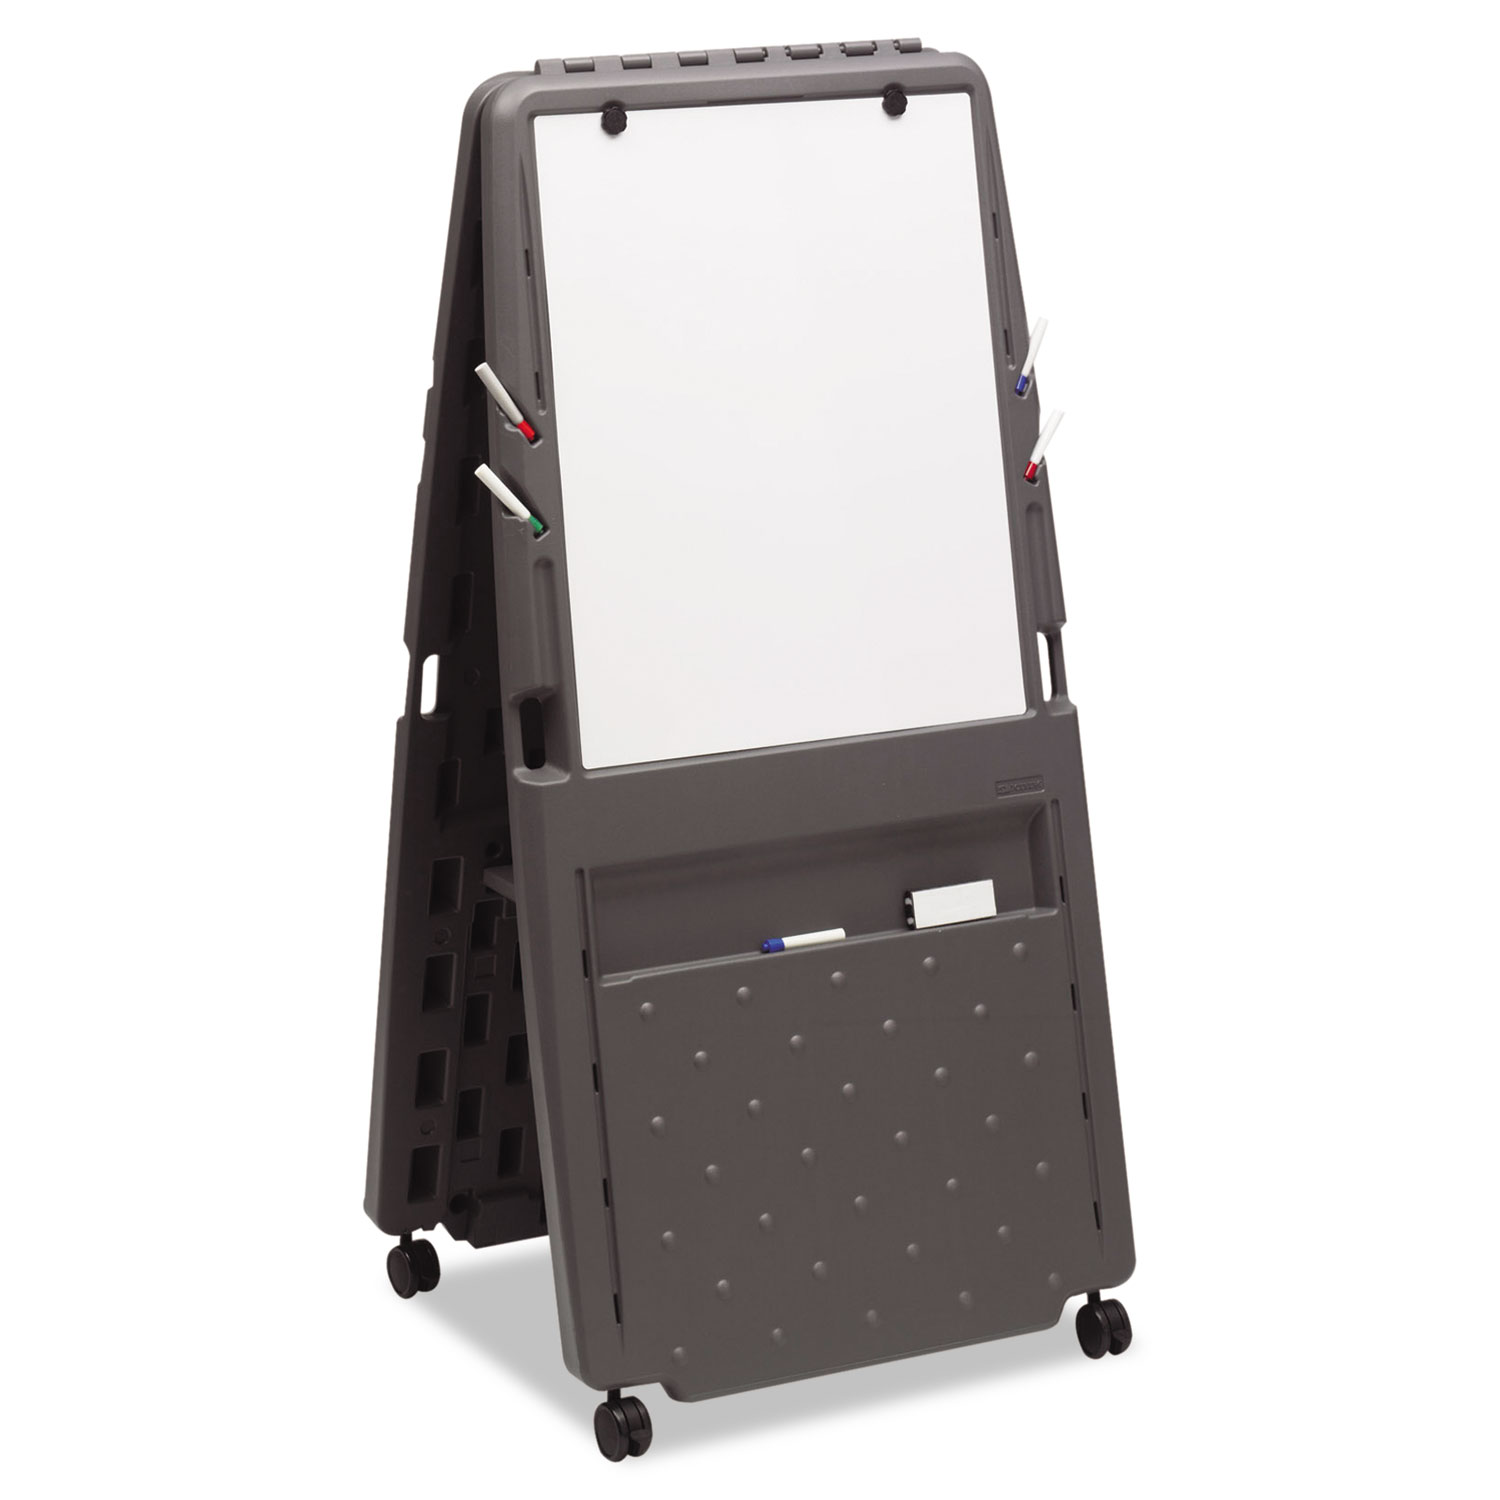  Iceberg 30237 Presentation Flipchart Easel With Dry Erase Surface, Resin, 33w x 28d x 73h, Charcoal (ICE30237) 